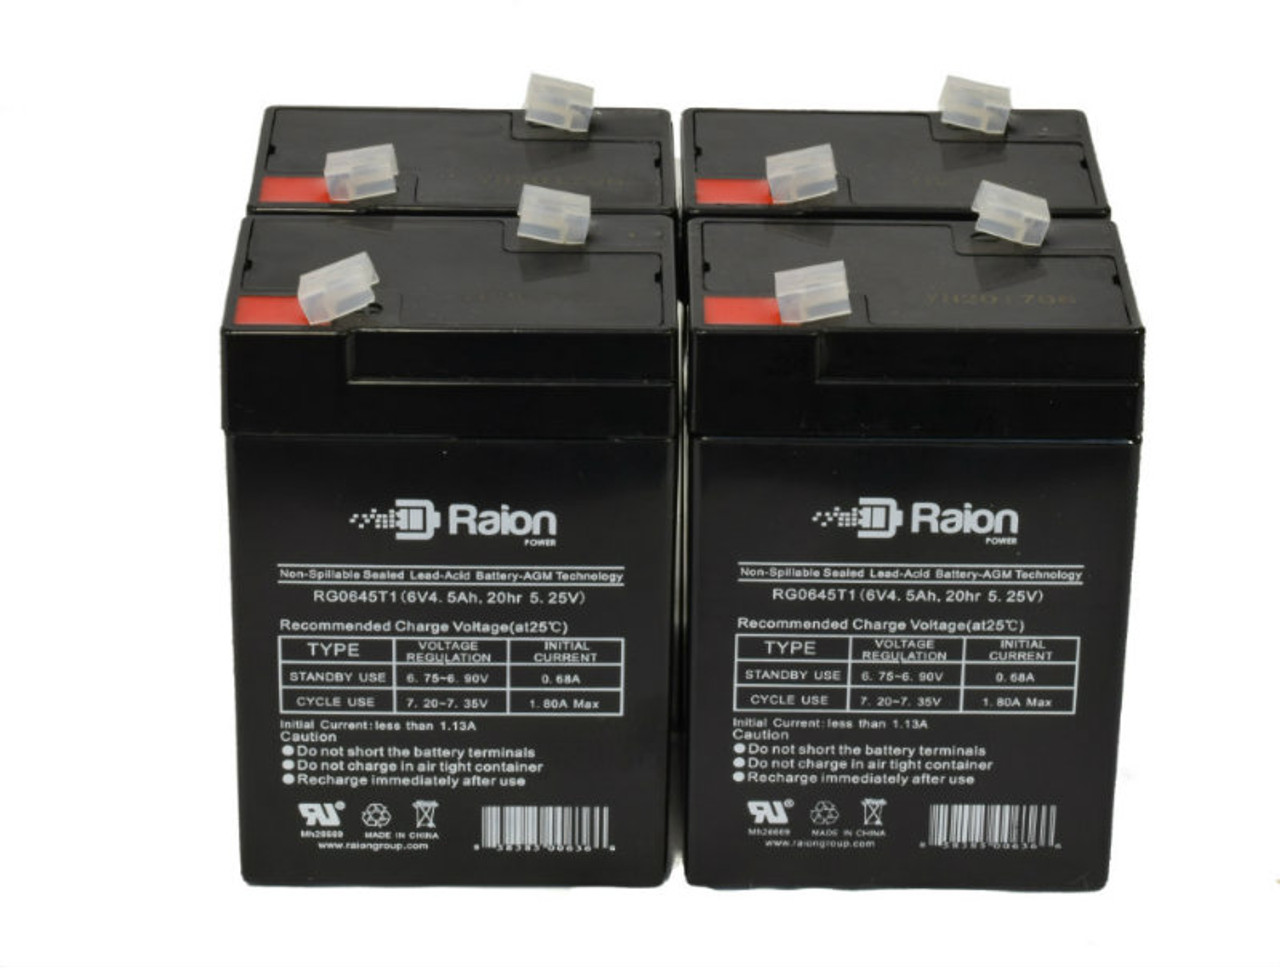 Raion Power 6V 4.5Ah Replacement Emergency Light Battery for Light Alarms 860.0004 - 4 Pack